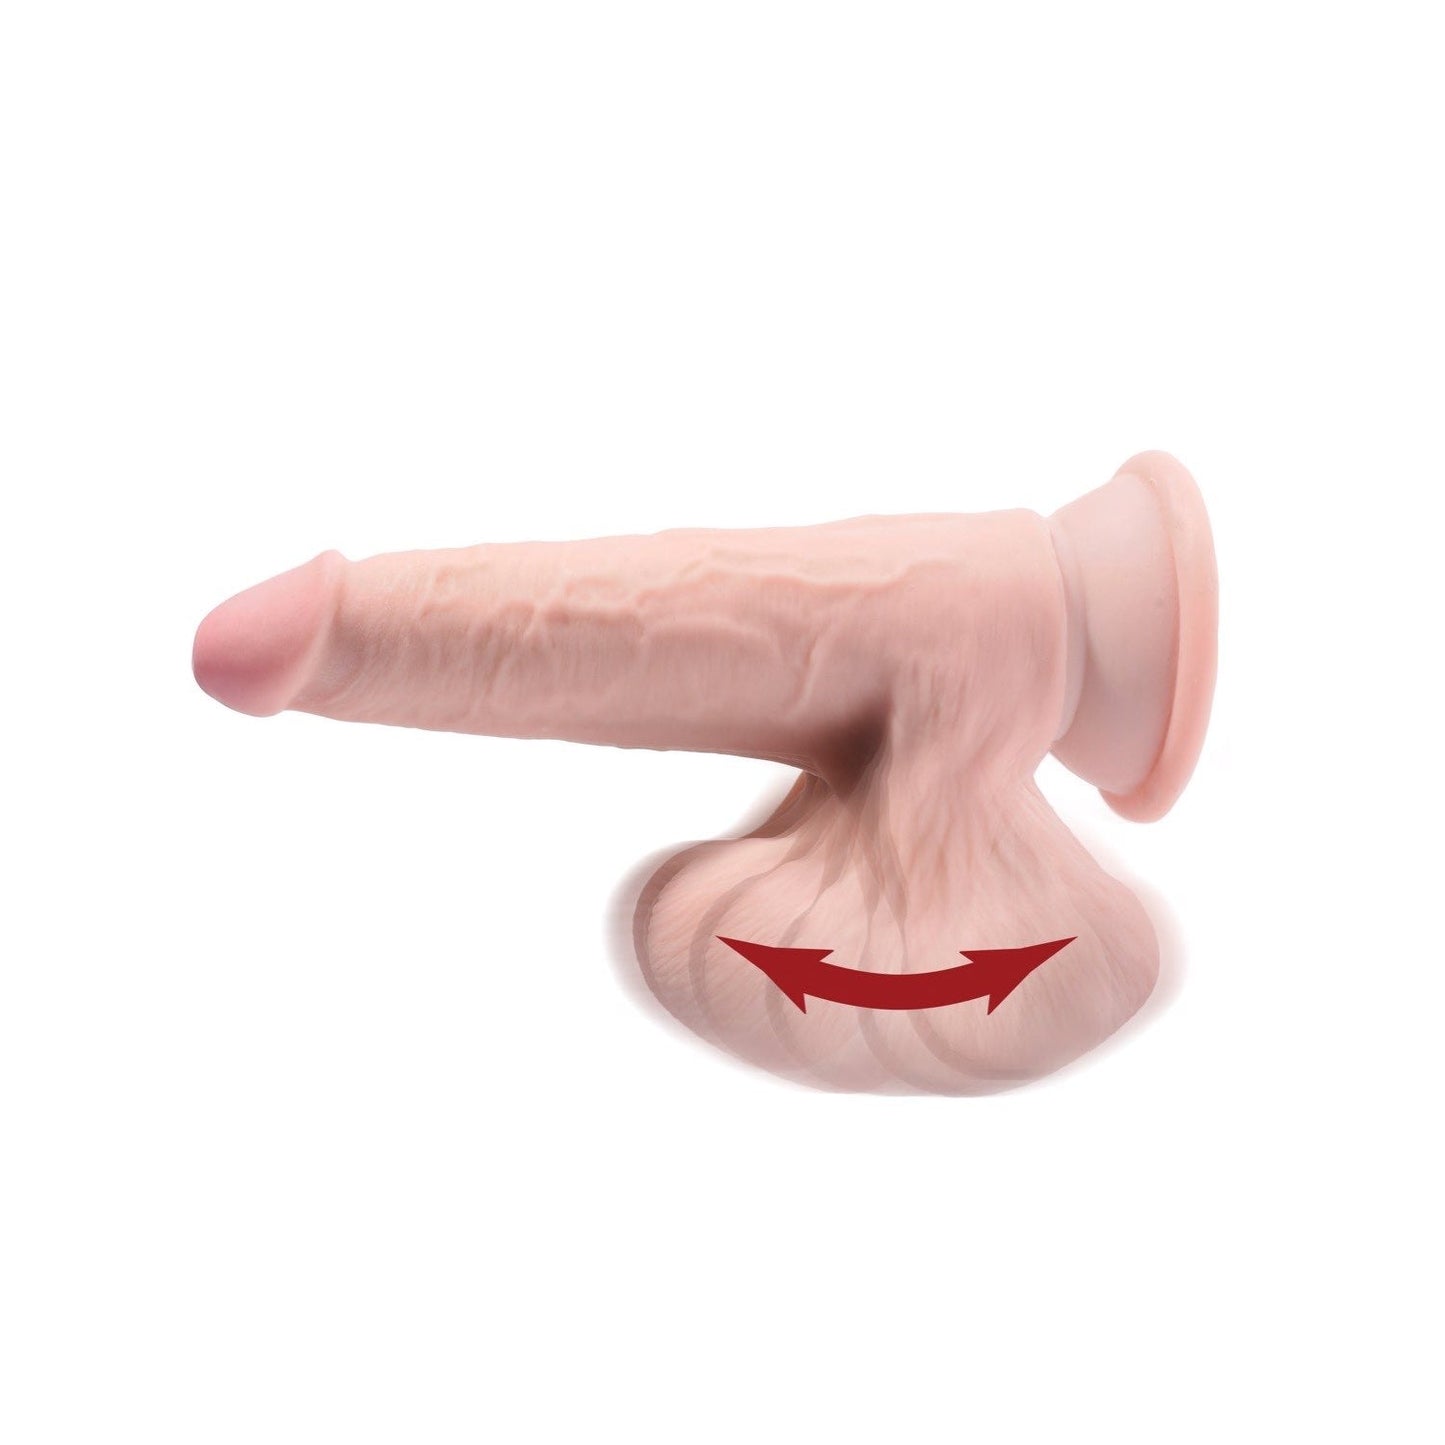 Plus 9" 3D Cock with Swinging Balls - Flesh 22.9 cm Dong